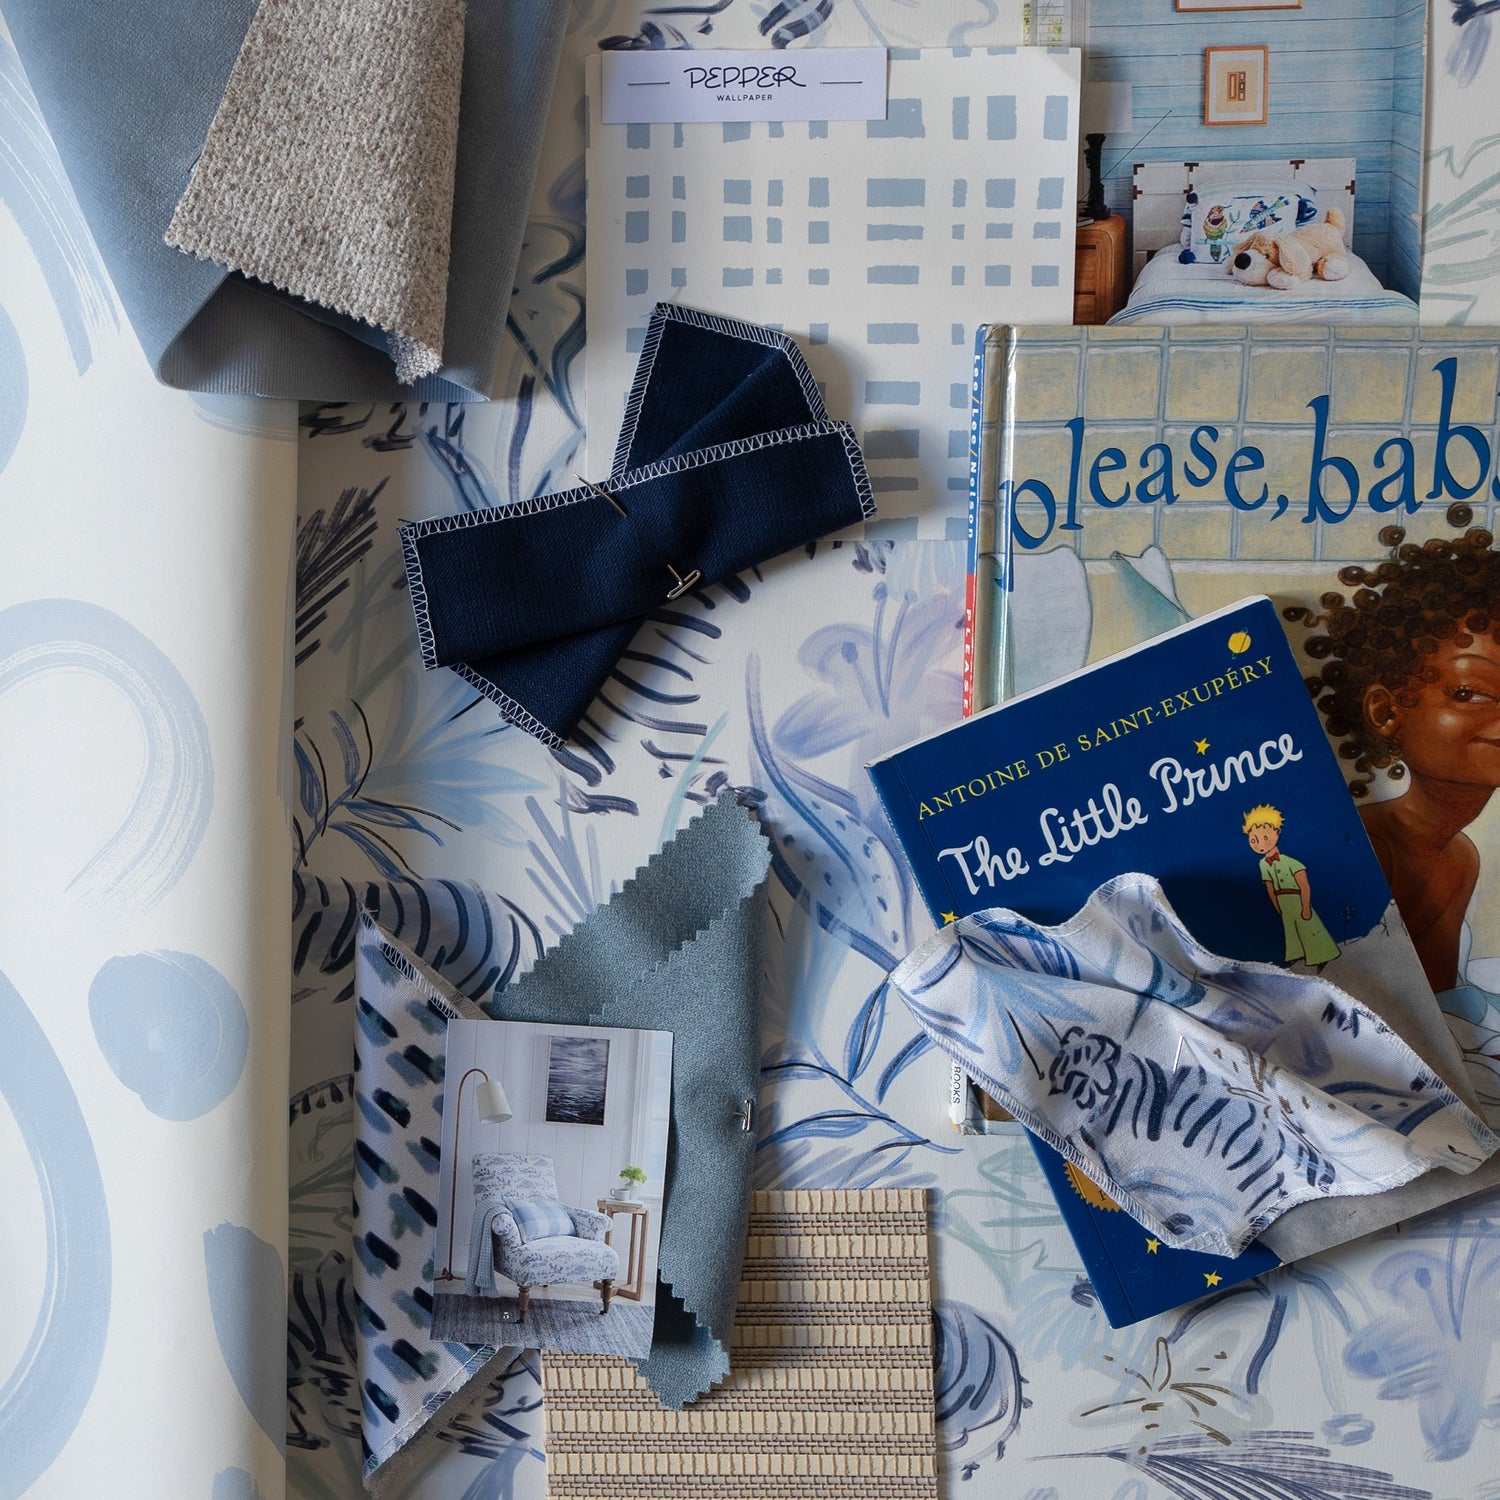 Interior design moodboard and fabric inspirations with Blue Chinoiserie Tiger Printed Swatch, Sky Blue Gingham Printed Swatch, Sky and Navy Blue Poppy Printed Swatch, Sky Blue Swatch, and navy blue swatch